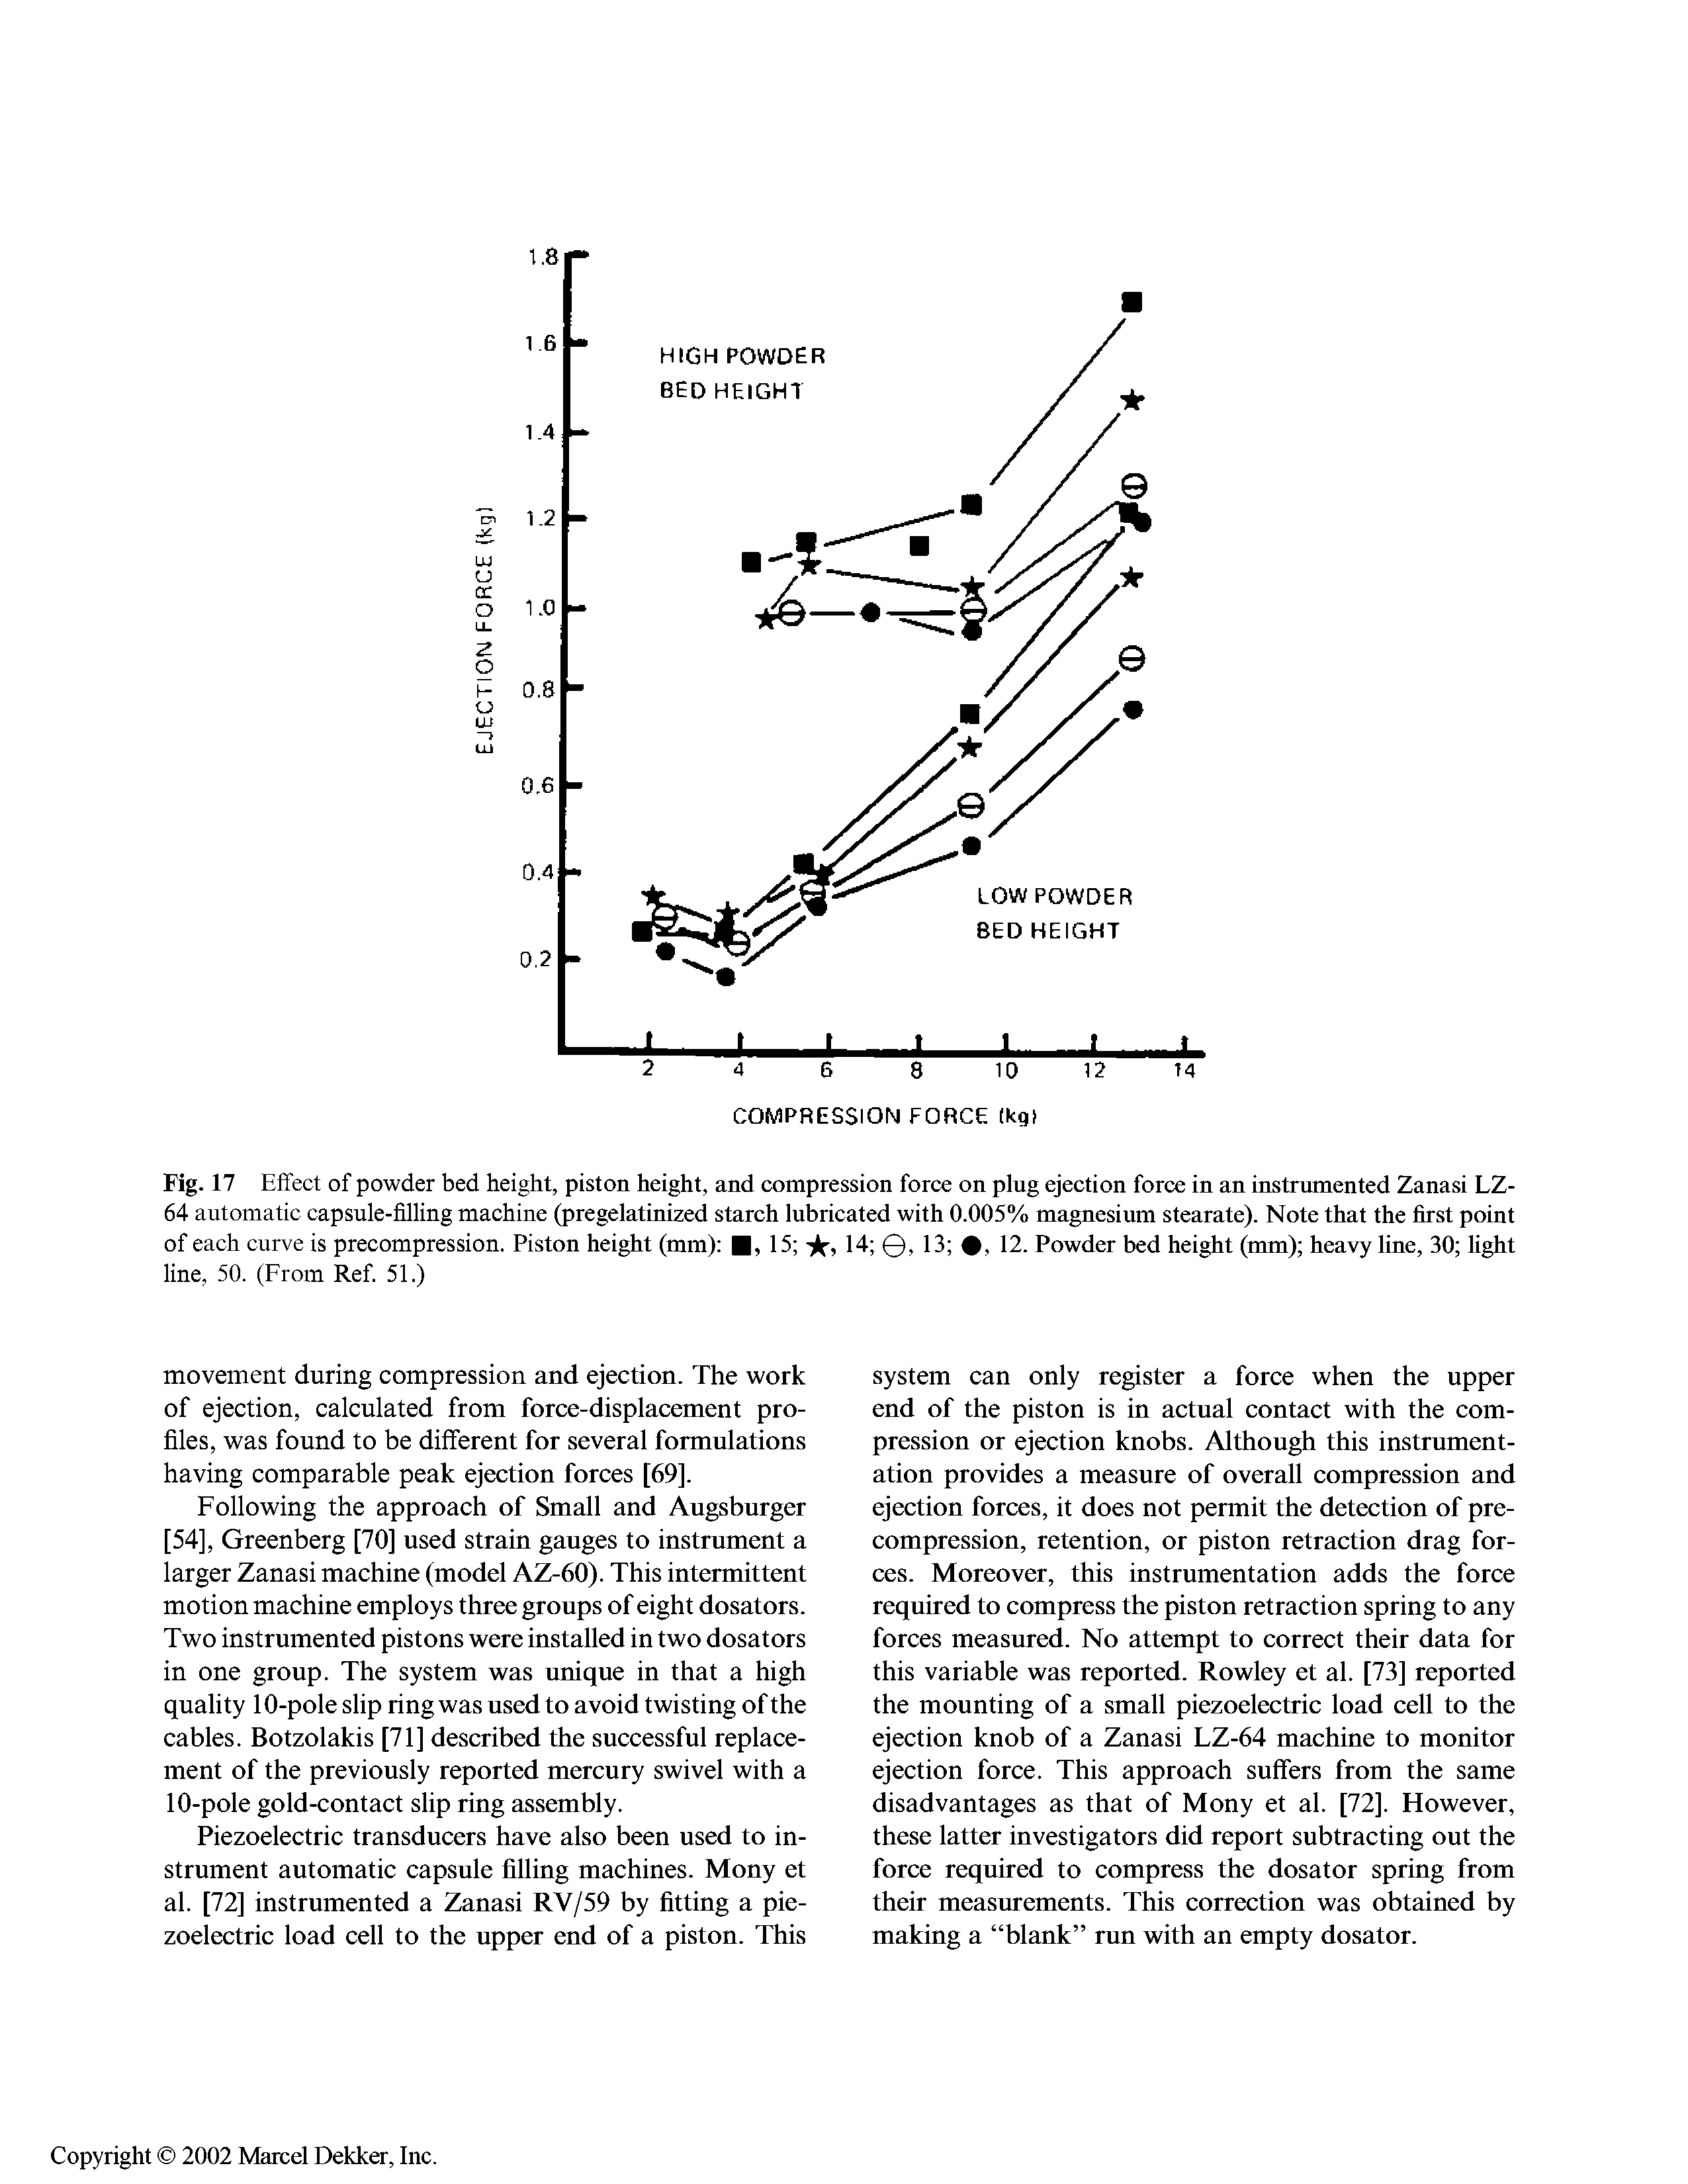 Fig. 17 Effect of powder bed height, piston height, and compression force on plug ejection force in an instrumented Zanasi LZ-64 automatic capsule-filling machine (pregelatinized starch lubricated with 0.005% magnesium stearate). Note that the first point of each curve is precompression. Piston height (mm) , 15 -jlf, 14 , 13 , 12. Powder bed height (mm) heavy line, 30 light line, 50. (From Ref. 51.)...